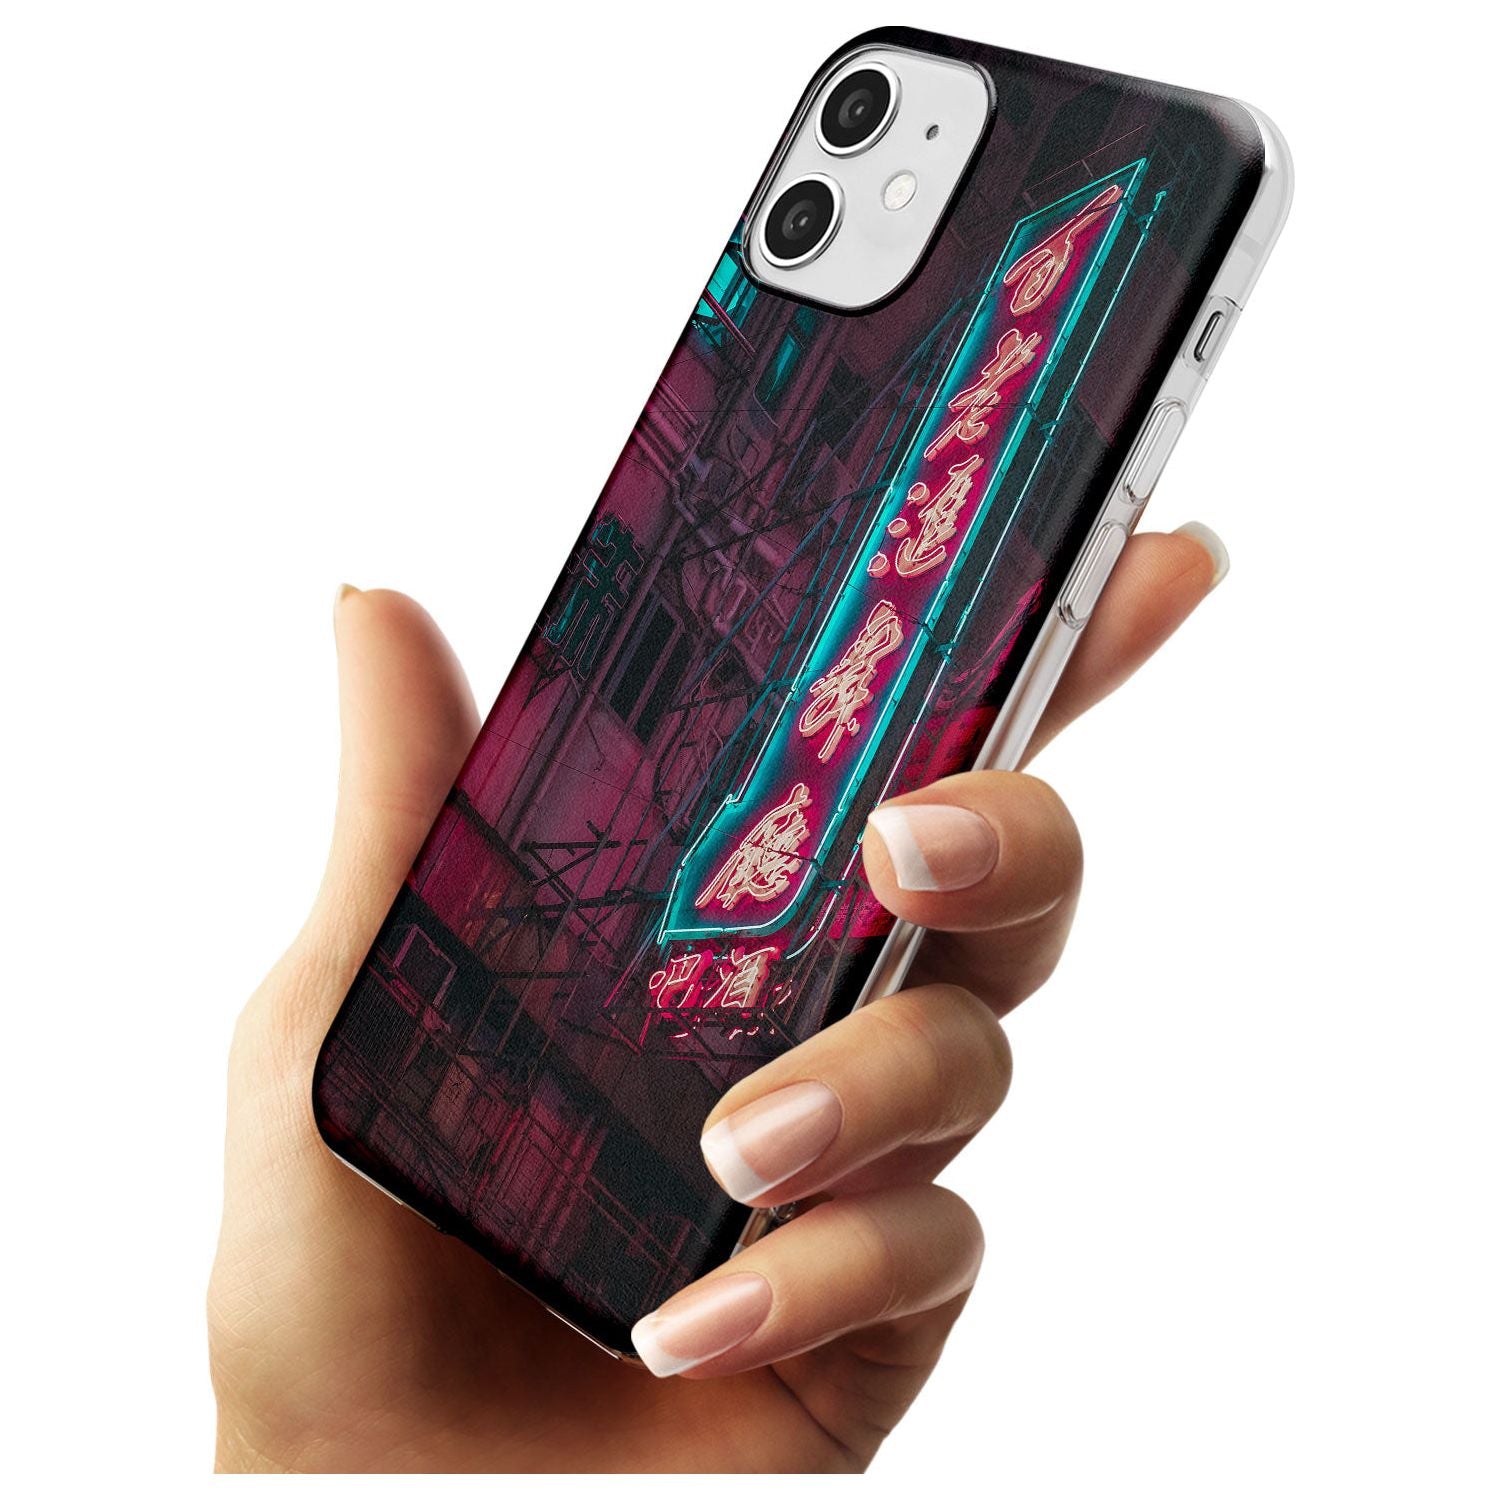 Large Kanji Sign - Neon Cities Photographs Slim TPU Phone Case for iPhone 11